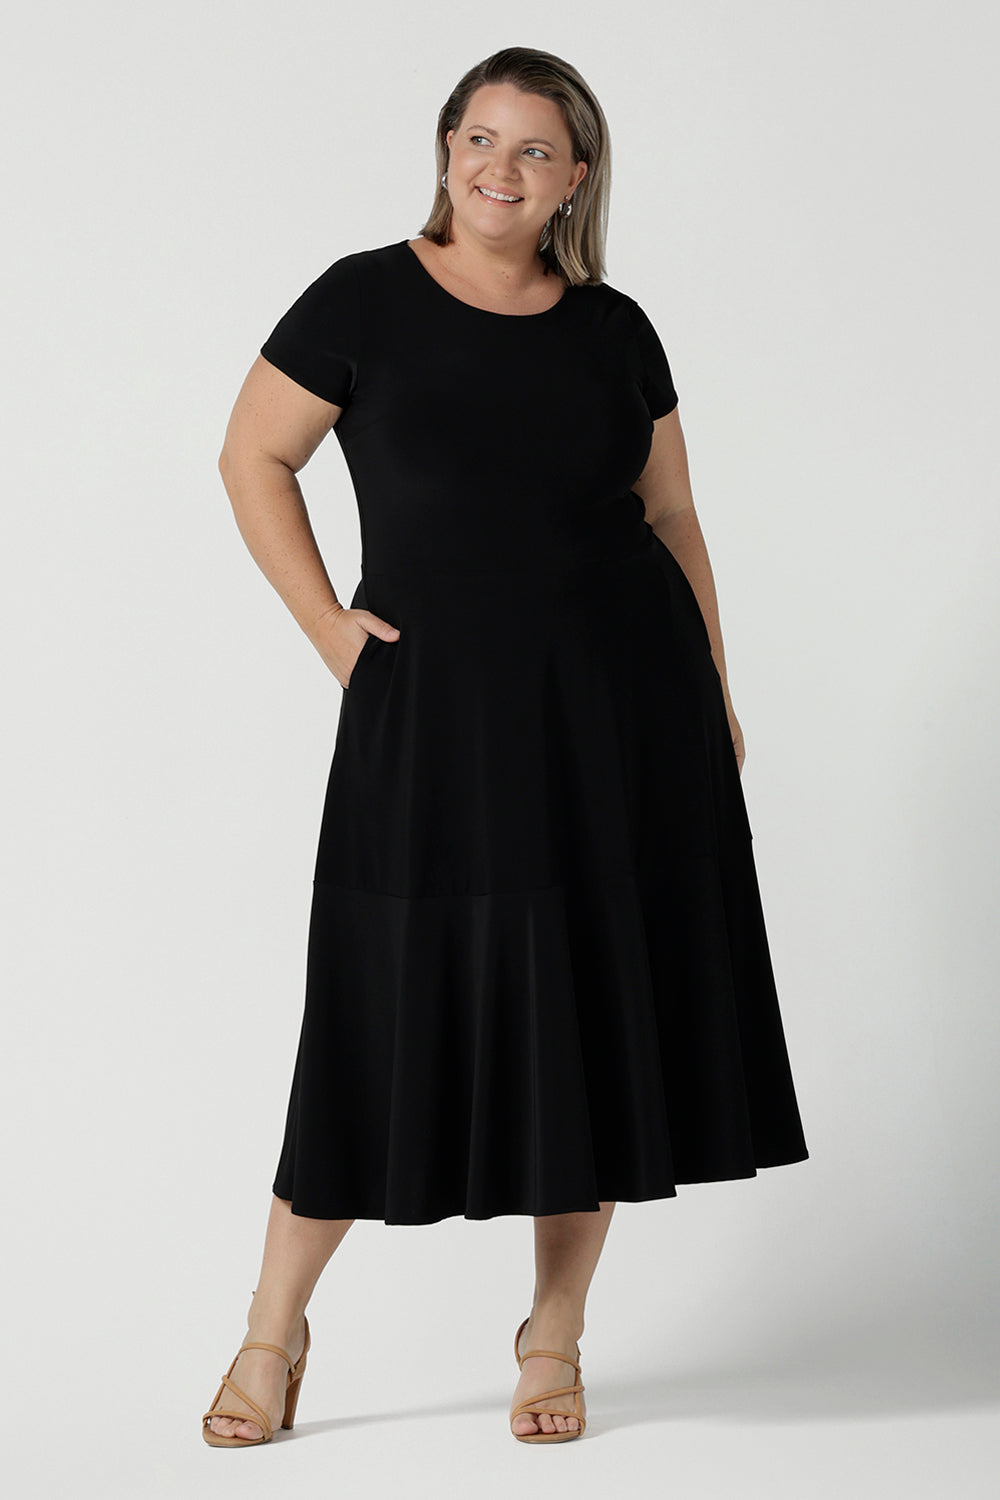 A size 18 woman wears the Amal dress in black is a slim fit round neck dress with waist seam and tier at the bottom. Functioning pockets. Great for work or event occasions. Made in Australia. Size inclusive fashion for women size 8 - 24.